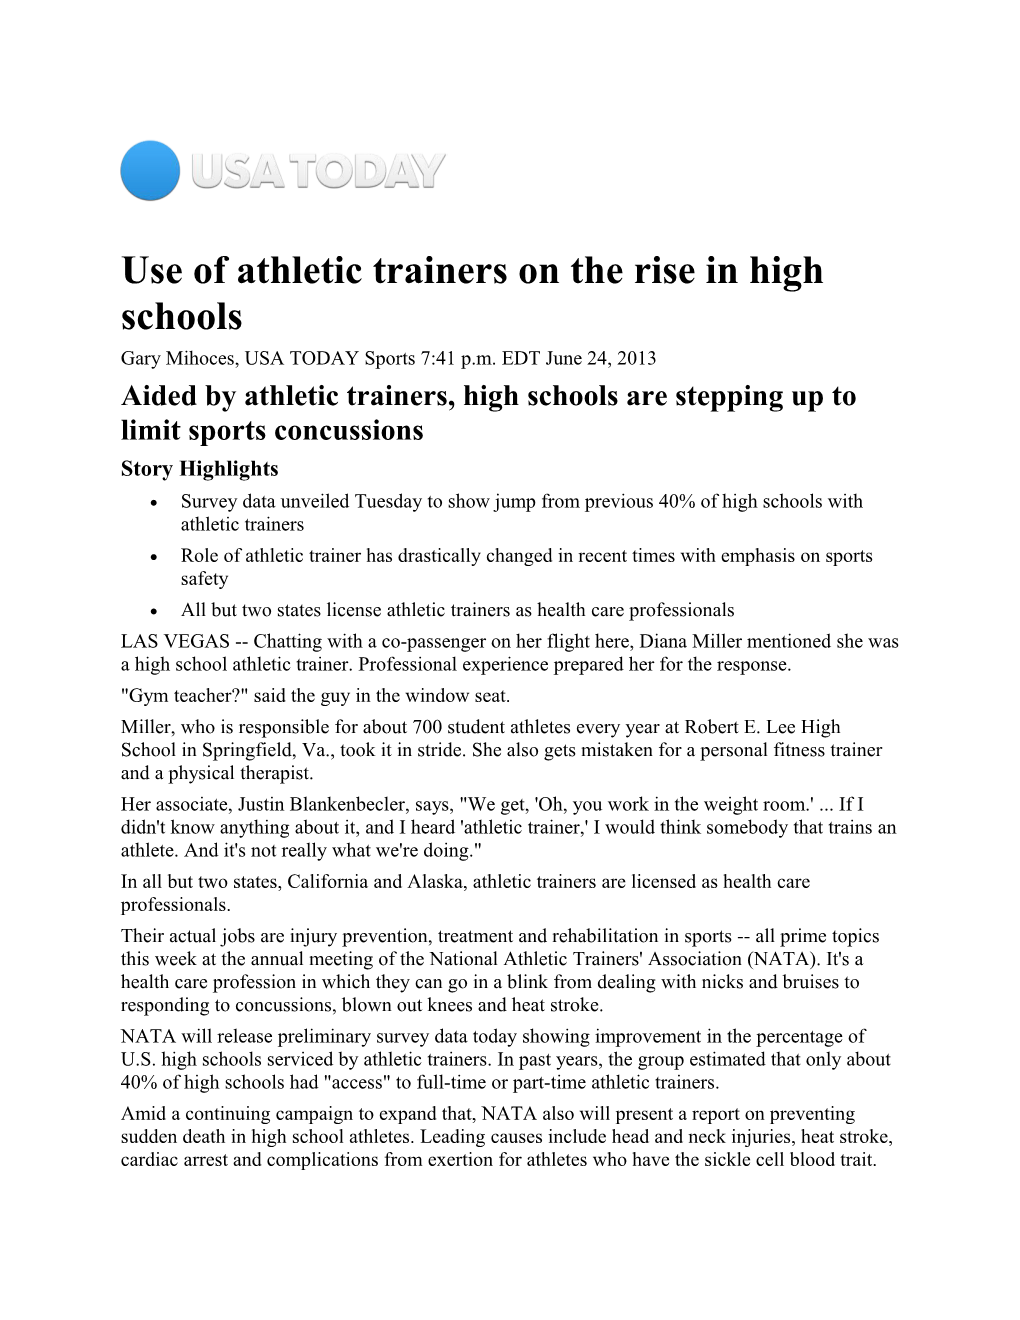 Use of Athletic Trainers on the Rise in High Schools